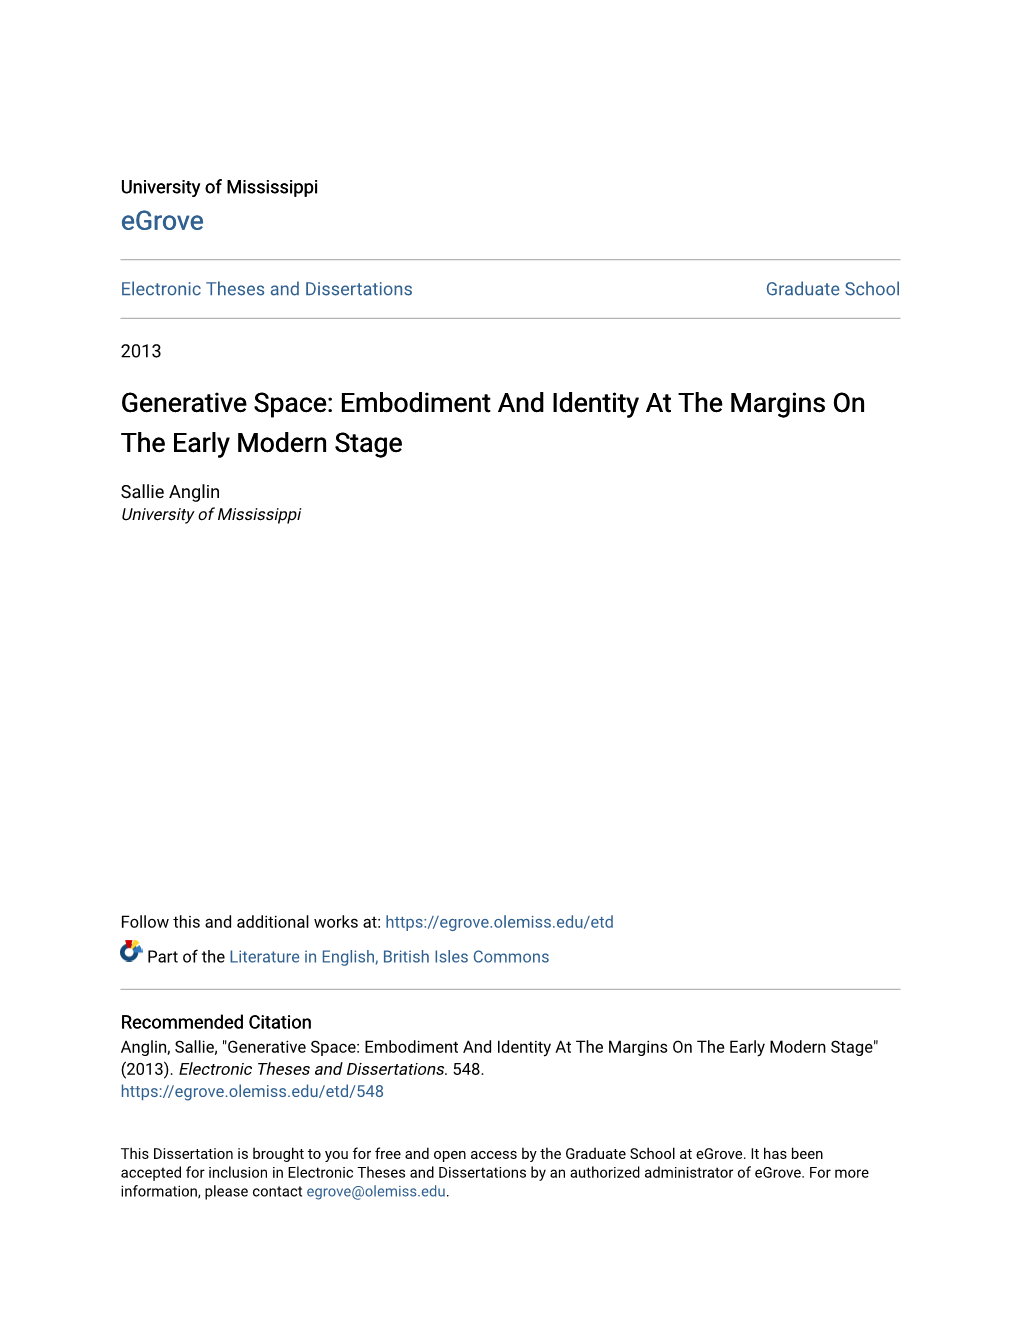 Generative Space: Embodiment and Identity at the Margins on the Early Modern Stage